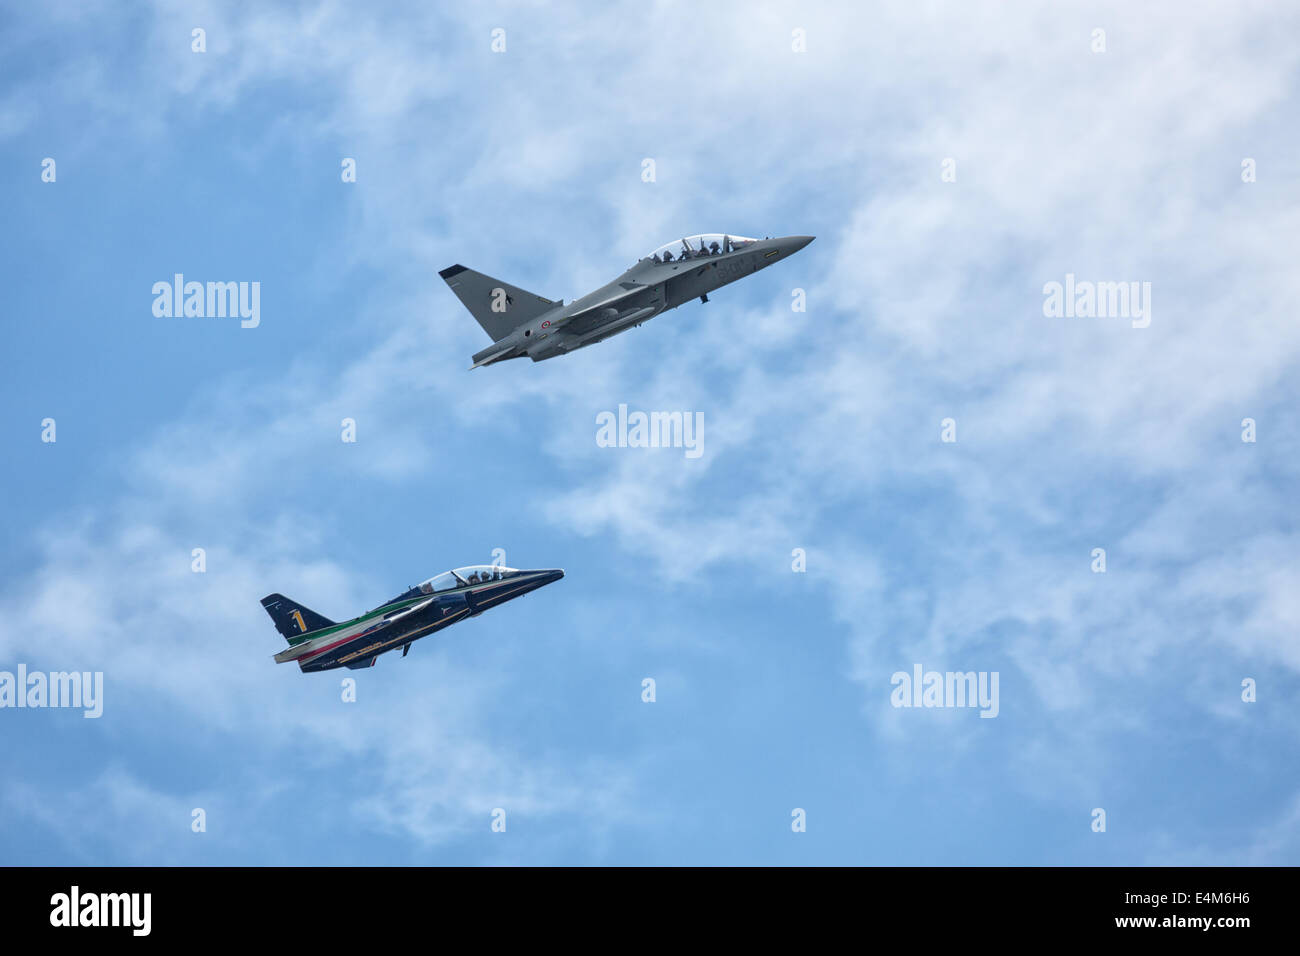 Farnborough, Hampshire, UK. 14th July, 2014. The first day of the 2014 Farnborough International Airshow saw a relatively short flying display that included the Italian Alenia Aermacchi M345, and M346 jet aircraft seen here.  Unfortunately the F-35B STOVL jet is still not cleared to fly to the UK Prime Minister David Cameron visted the show and confirmed British commitment to the UK aero and defence industries. Credit:  Niall Ferguson/Alamy Live News Stock Photo